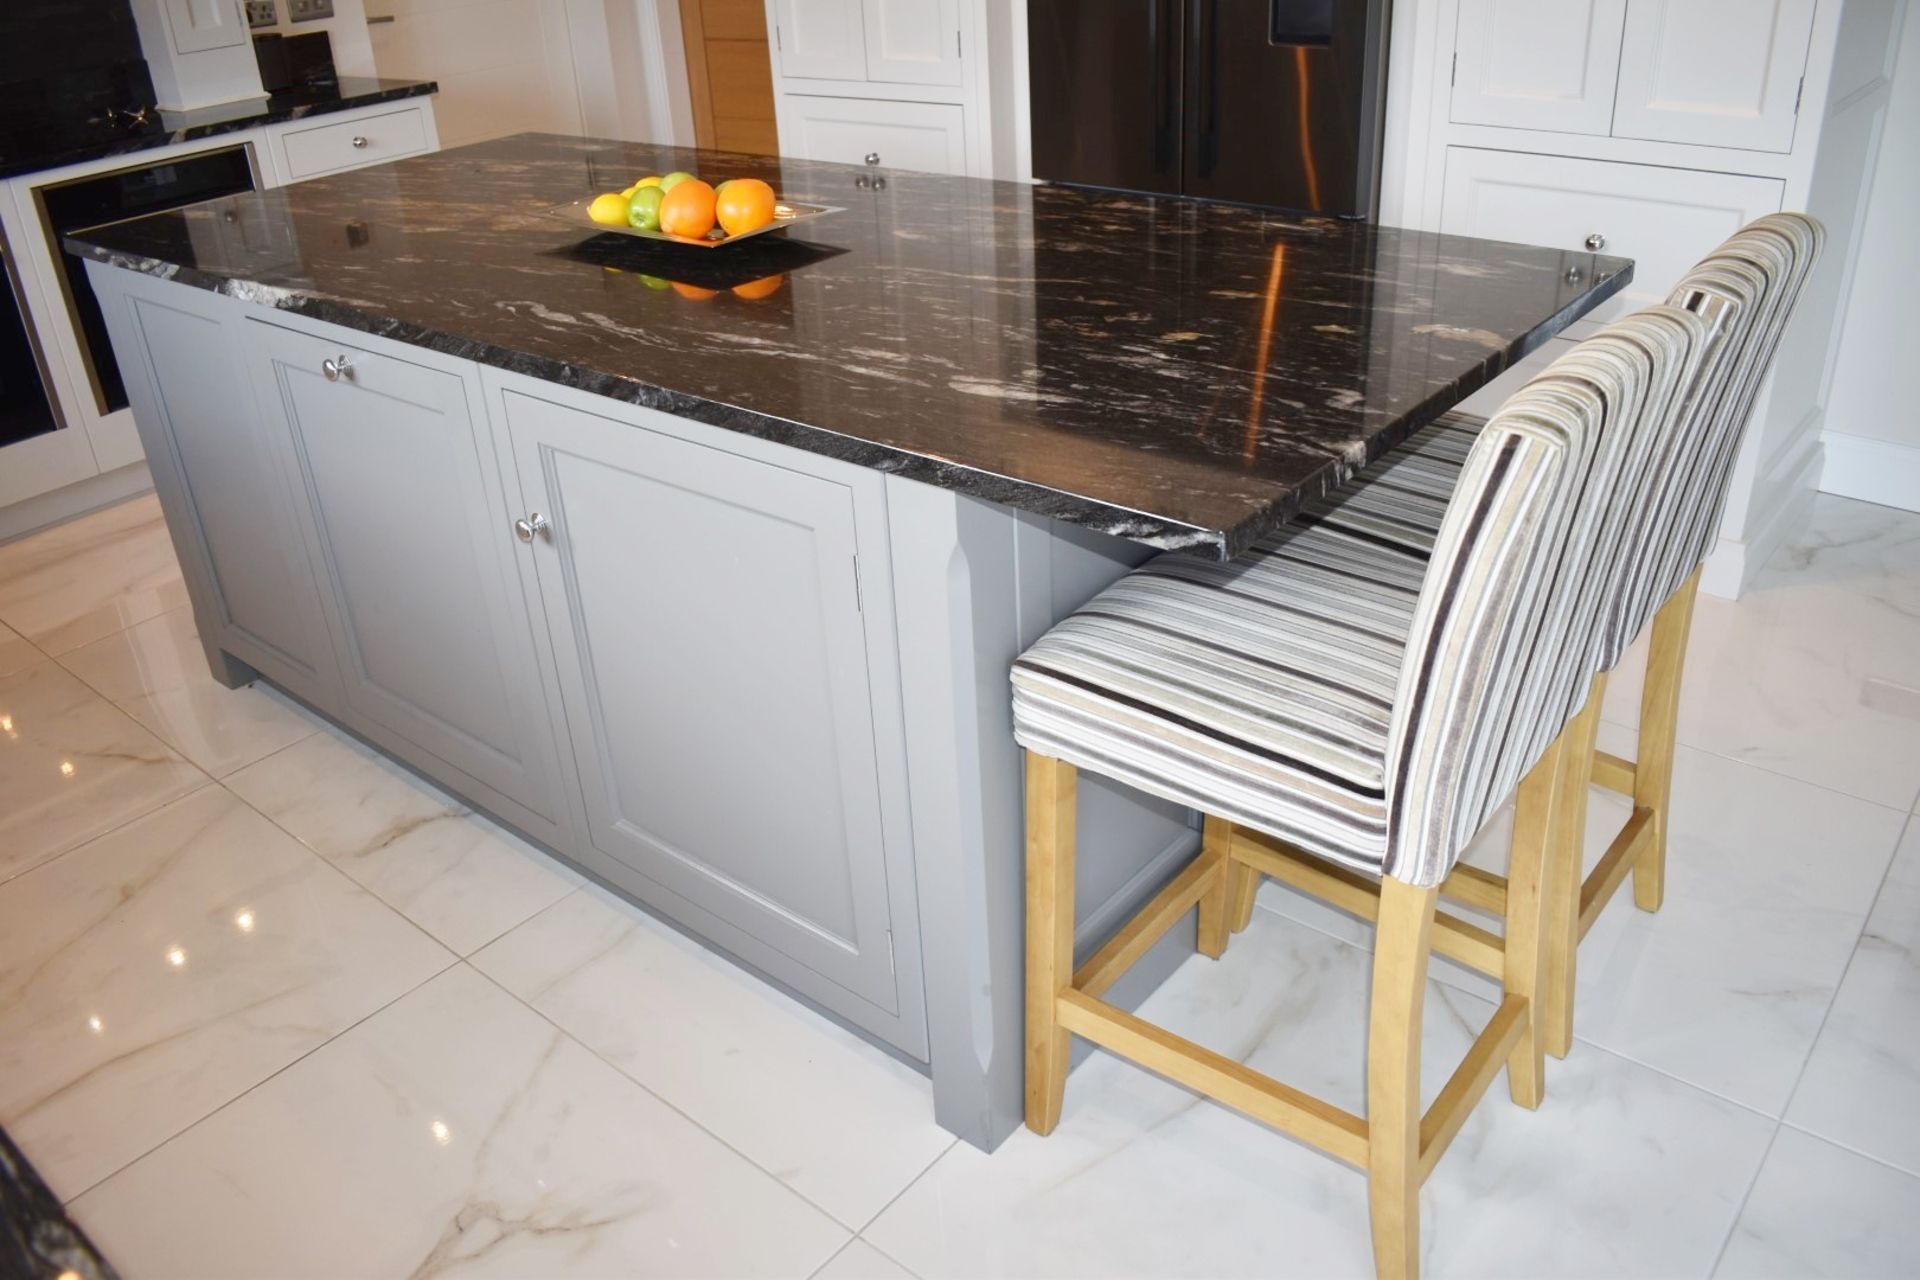 1 x Bespoke Handmade Framed Fitted Kitchen By Matthew Marsden Furniture - Features Hand Painted - Image 35 of 97